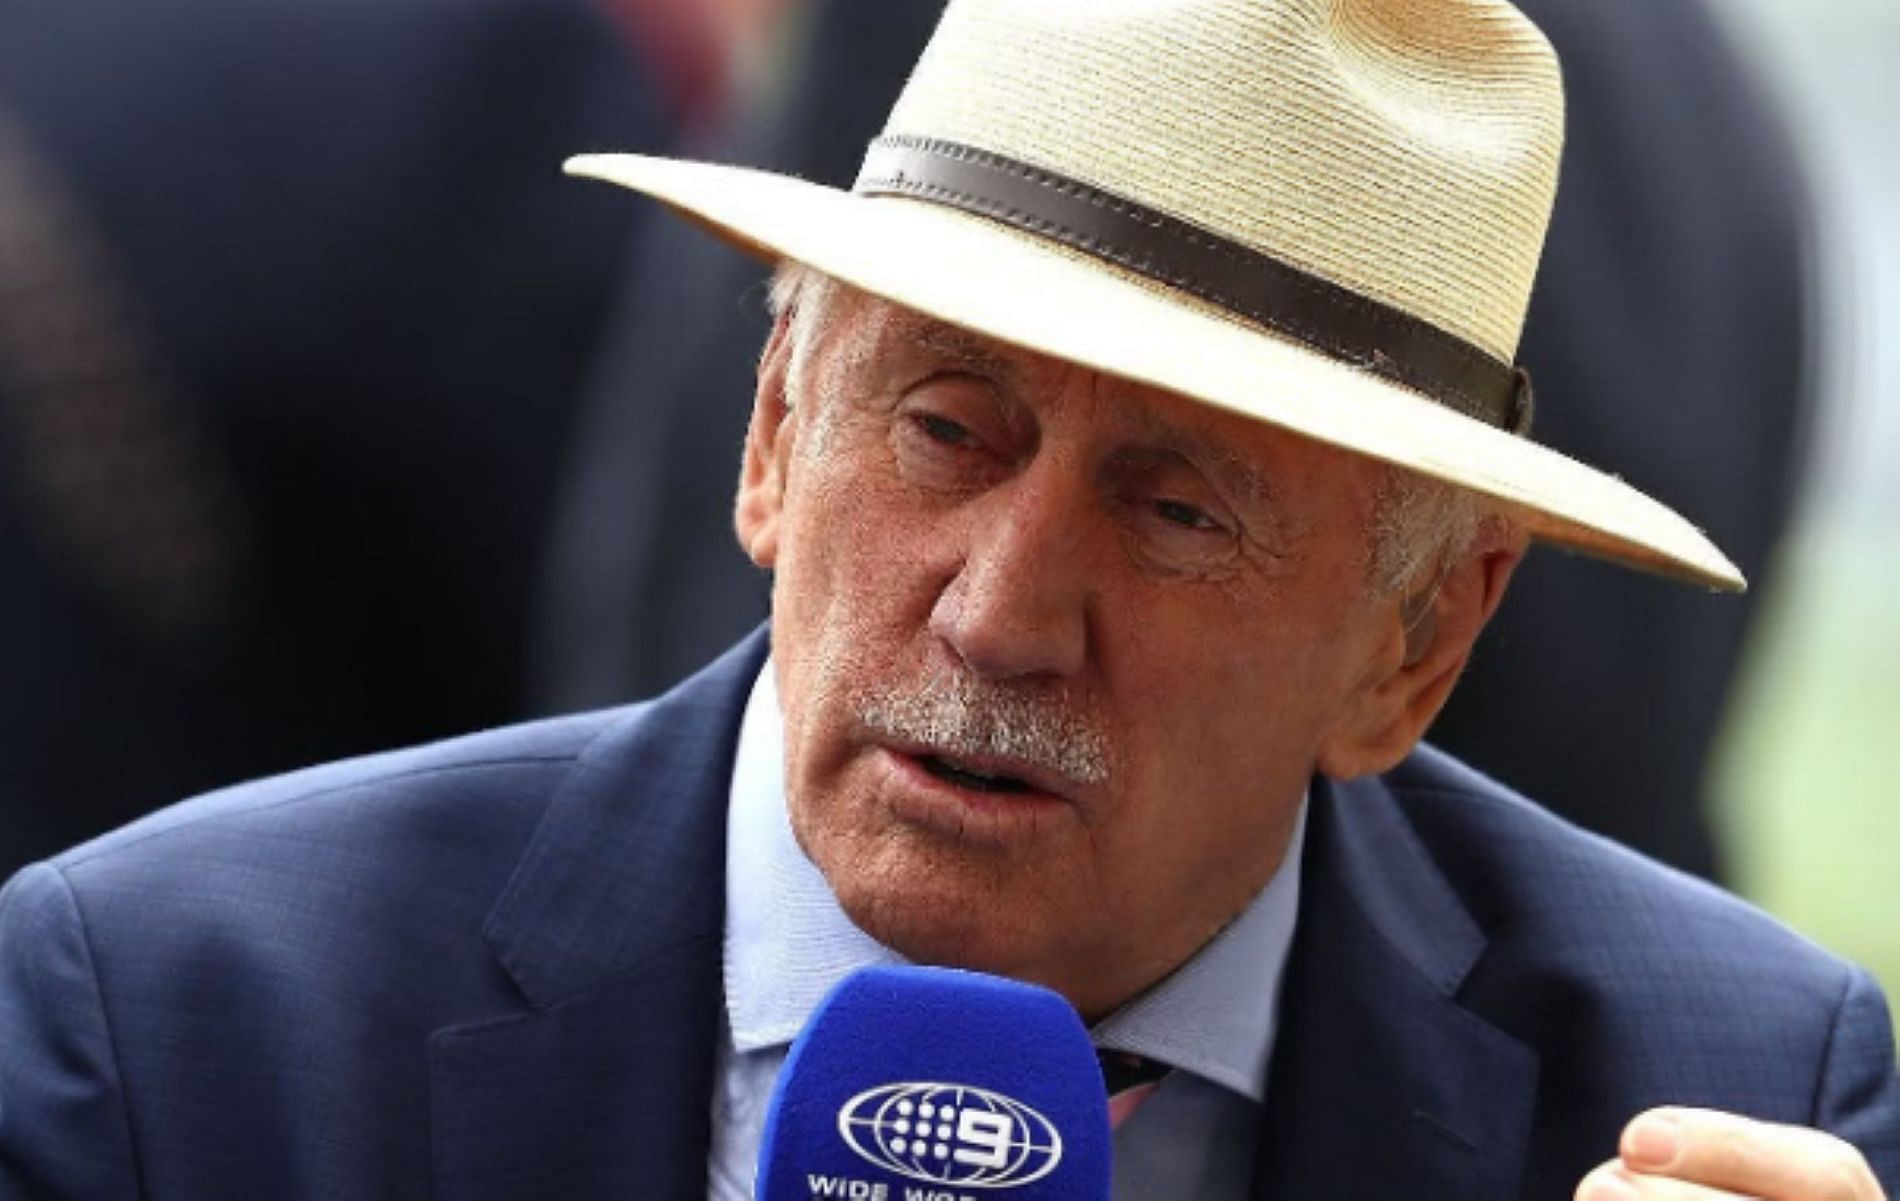 Ian Chappell had strong words of advice when it came to Australian selection.